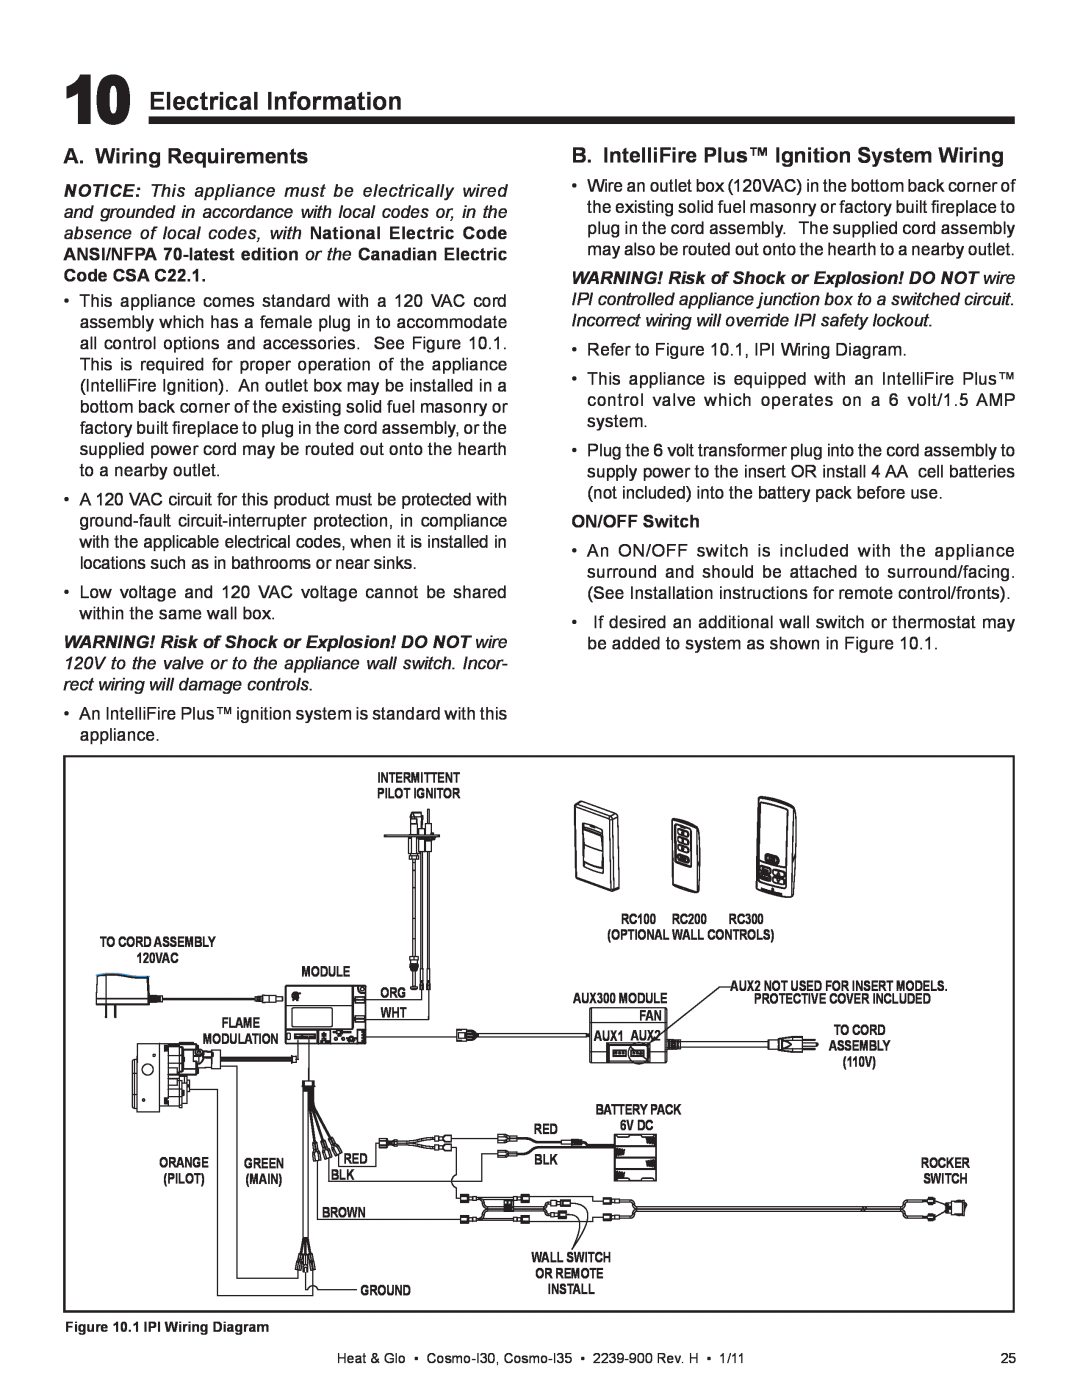 Heat & Glo LifeStyle Cosmo-130 Electrical Information, A. Wiring Requirements, B. IntelliFire Plus Ignition System Wiring 